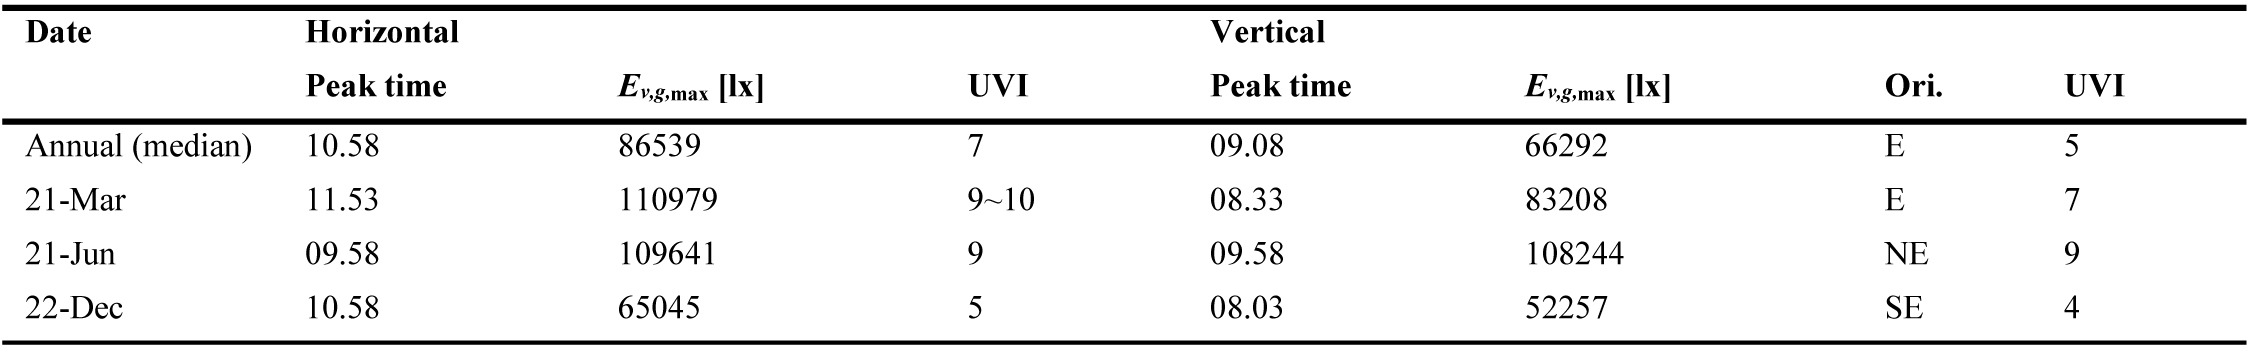 Estimated peak time (hh.mm) of global horizontal and vertical illuminance and the corresponding UV index for the baseline scene.